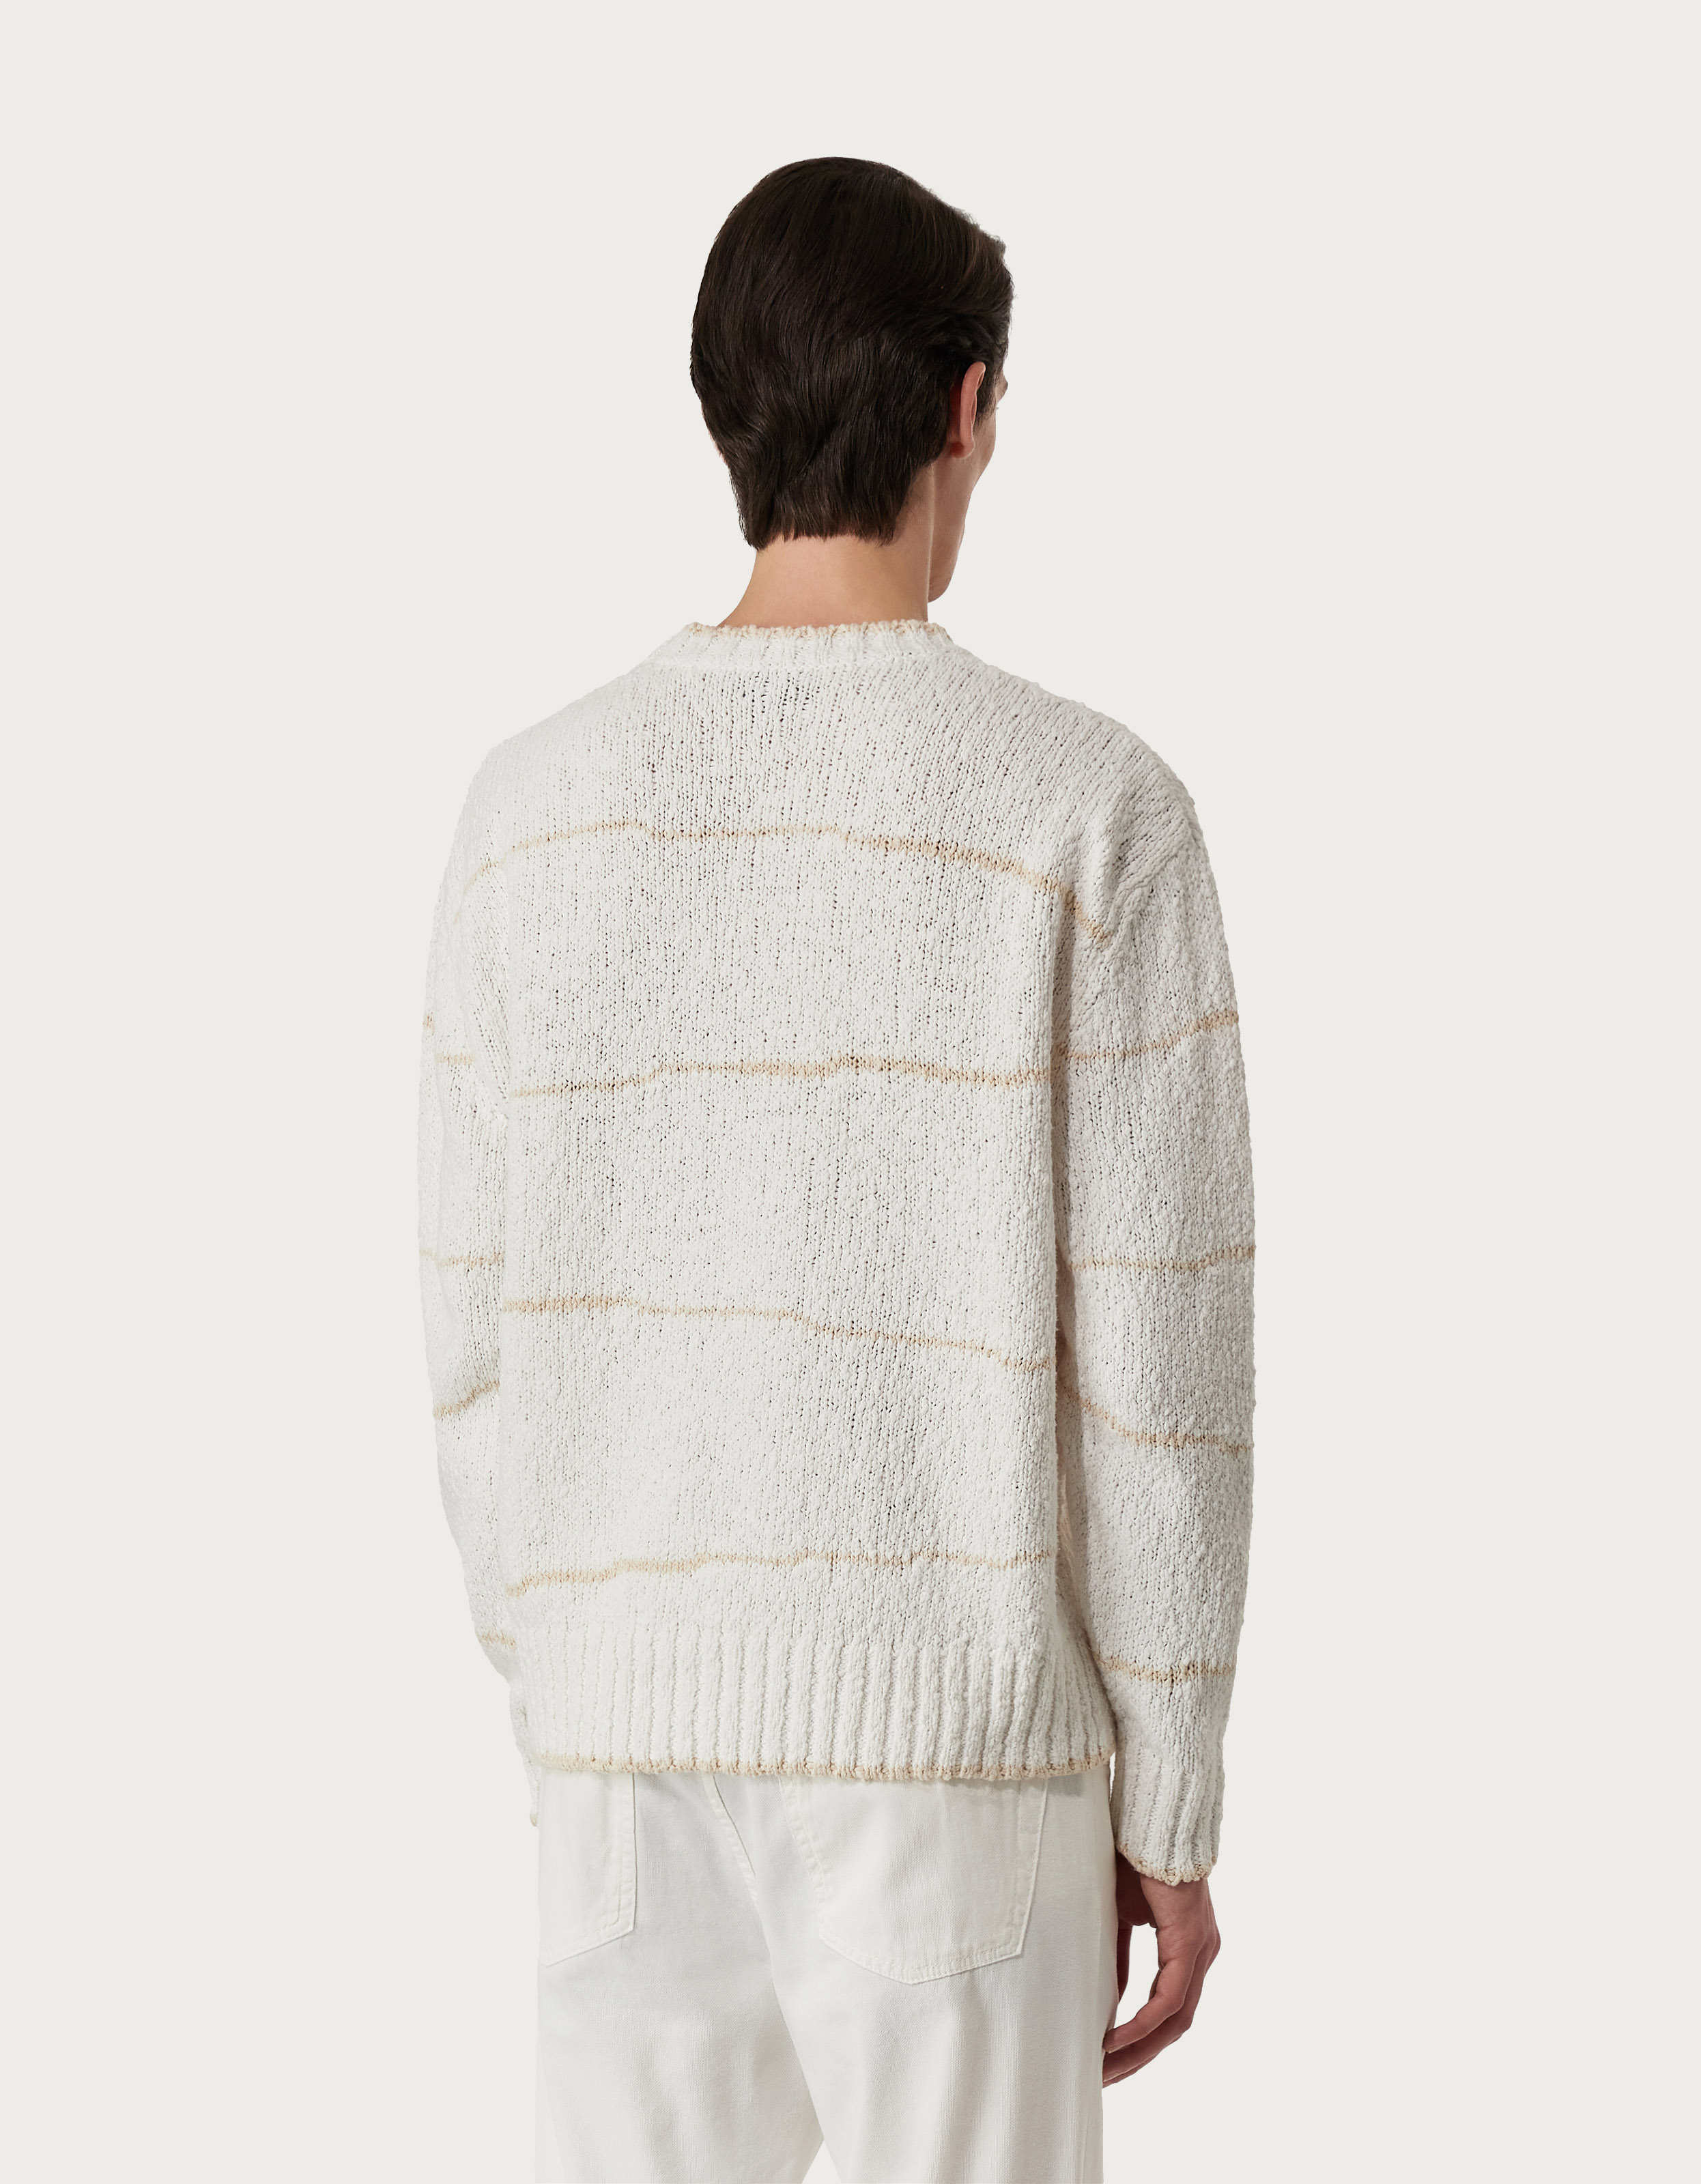 Relaxed fit crew-neck in white and cream cotton - Canali US